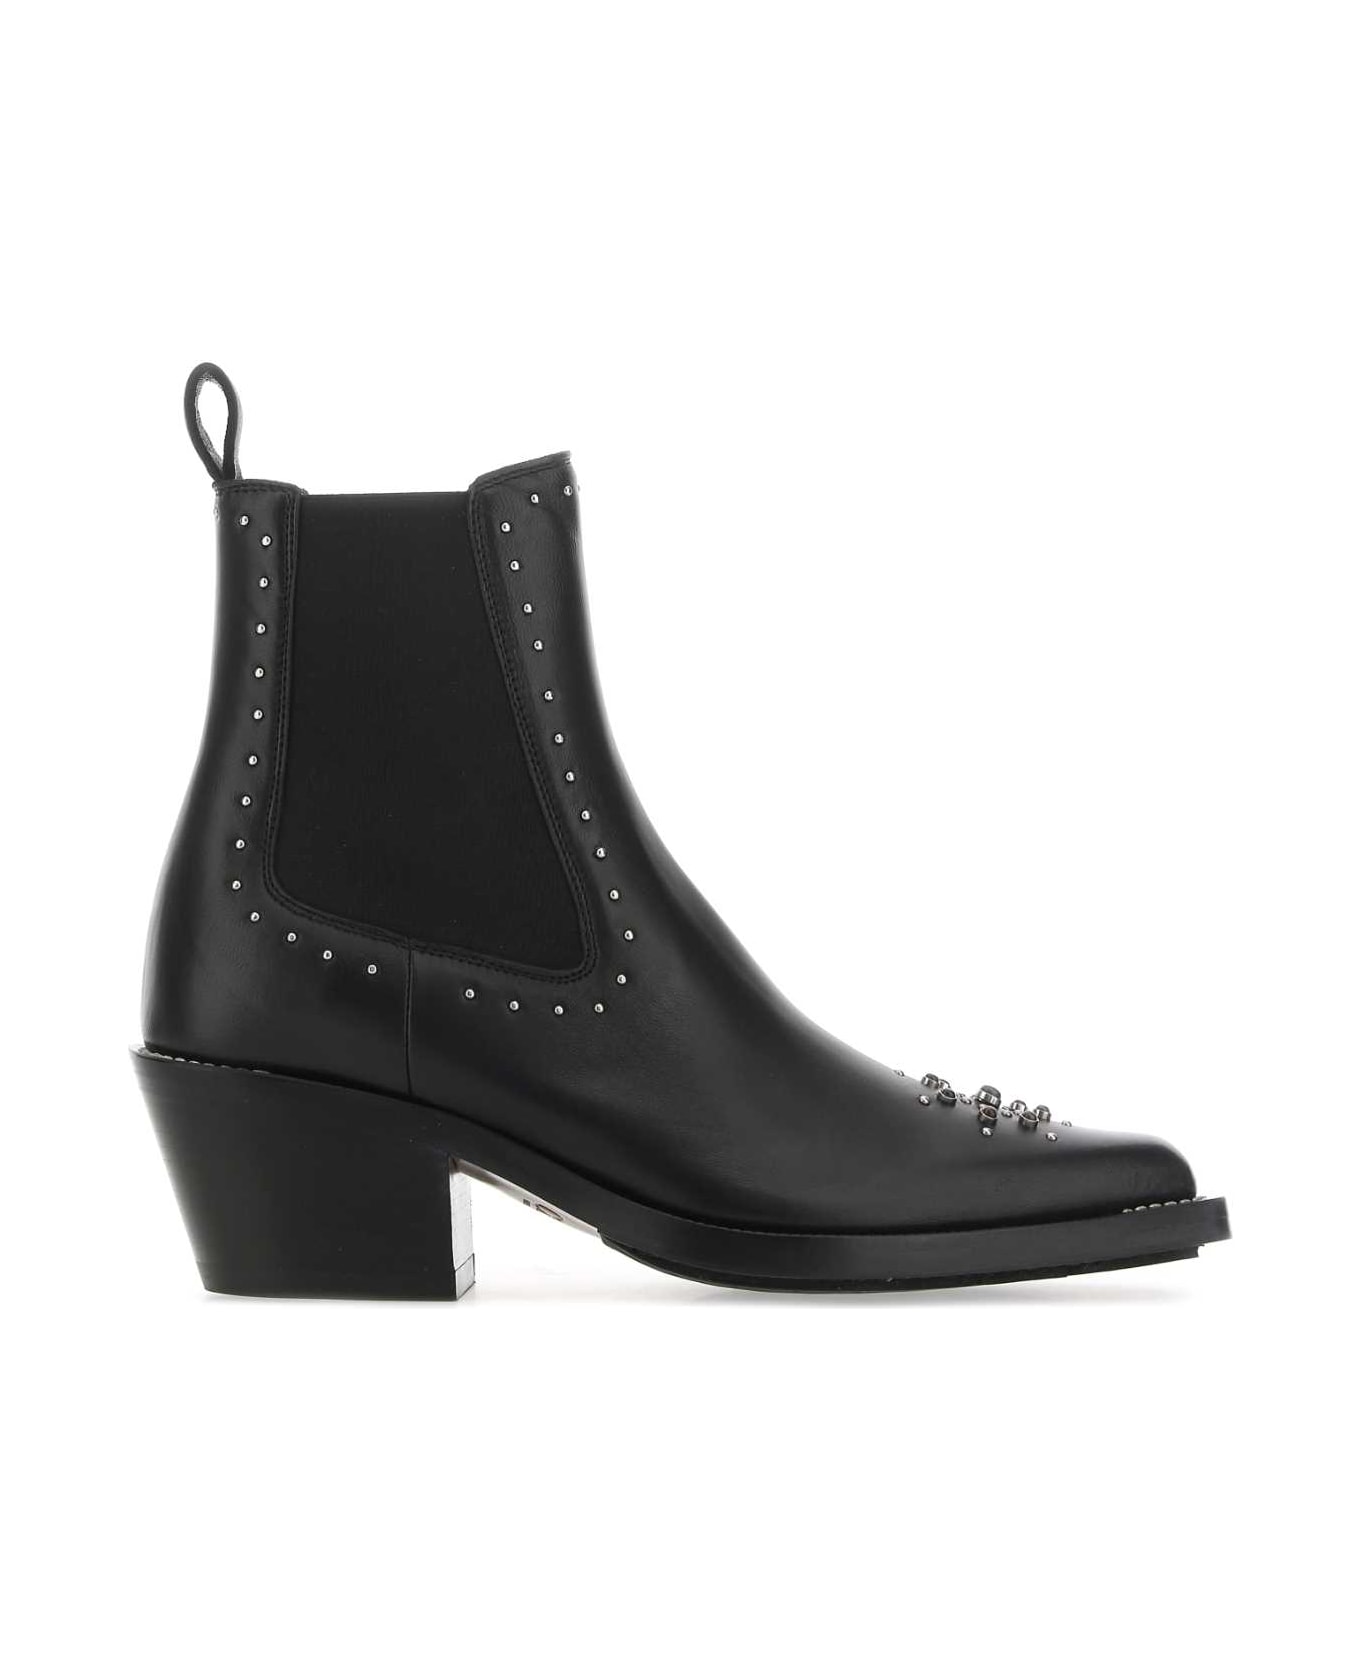 Chloé Black Leather Nellie Ankle Boots - 001 ブーツ